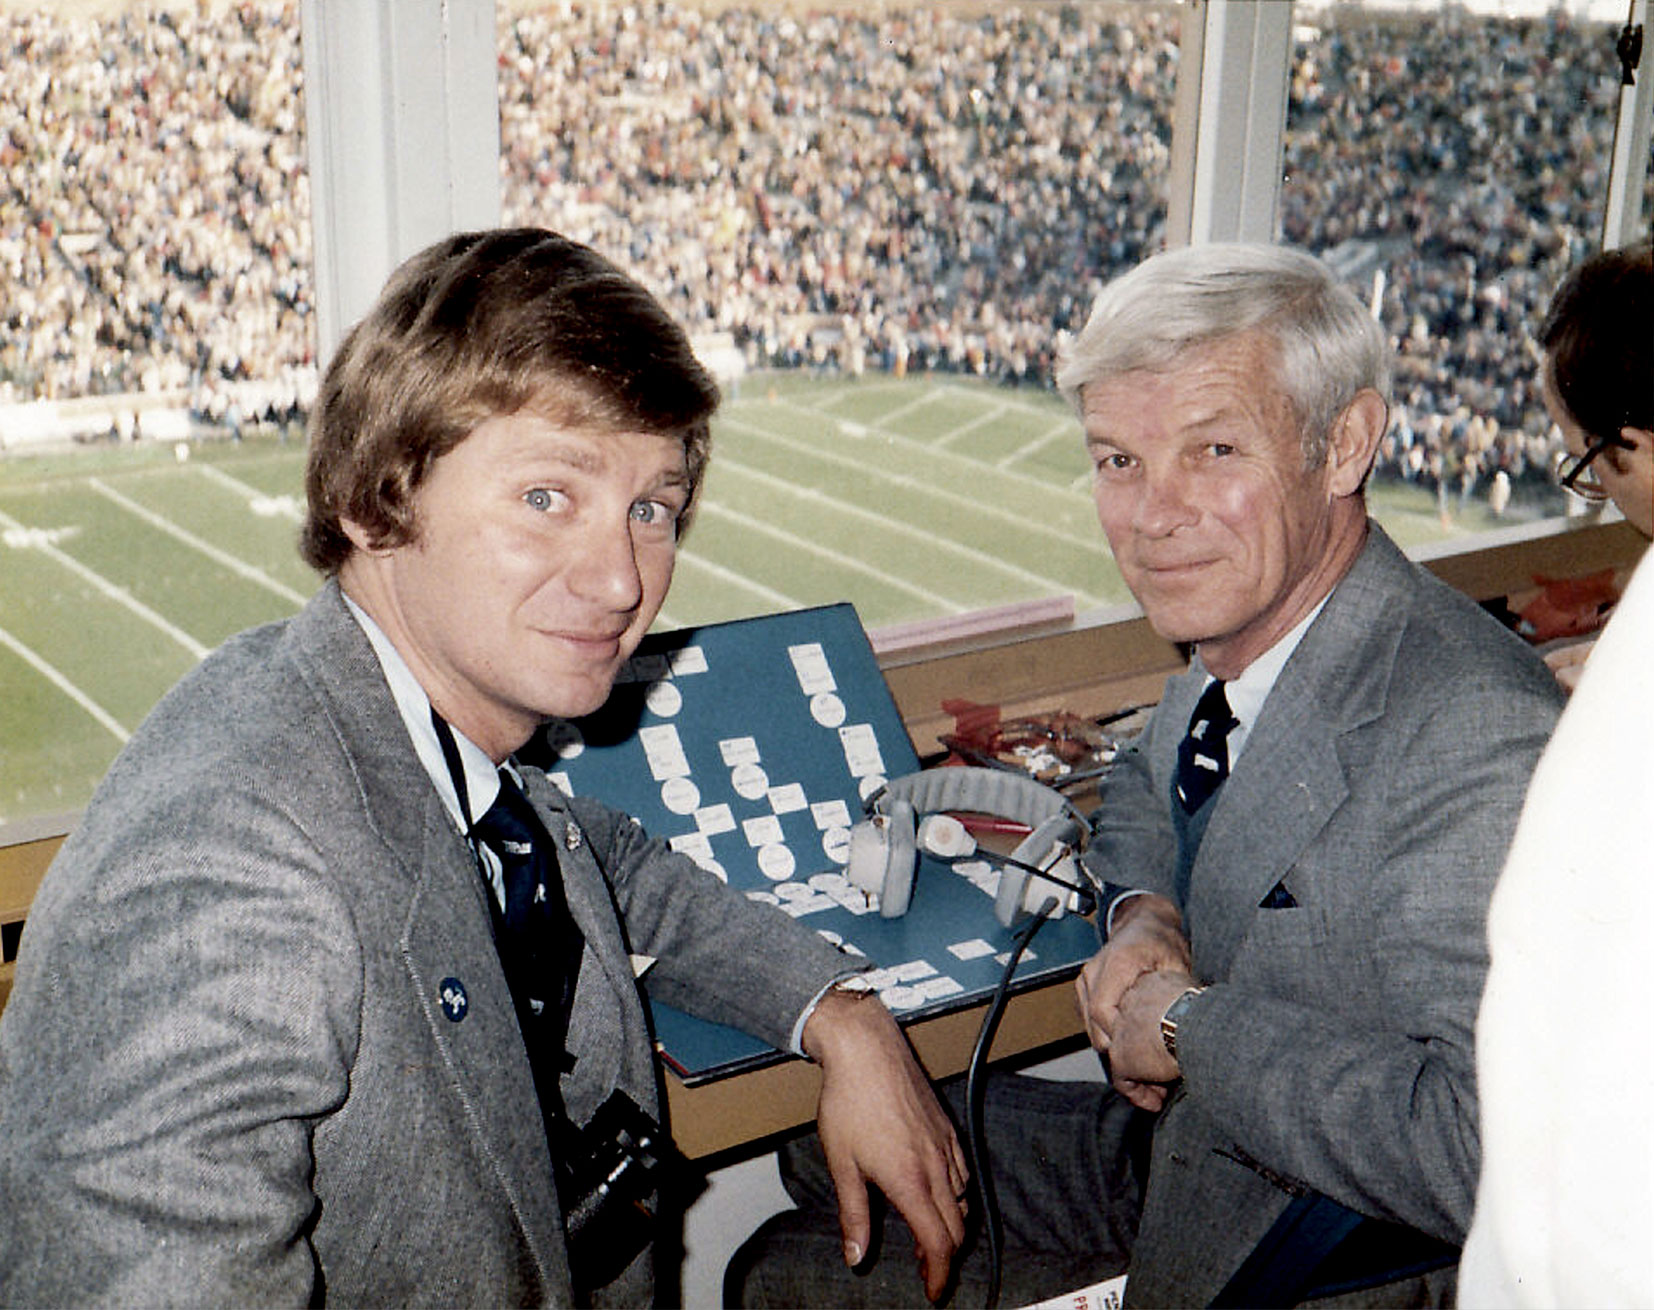 Levine with Fran Fisher at a Penn State football game, courtesy